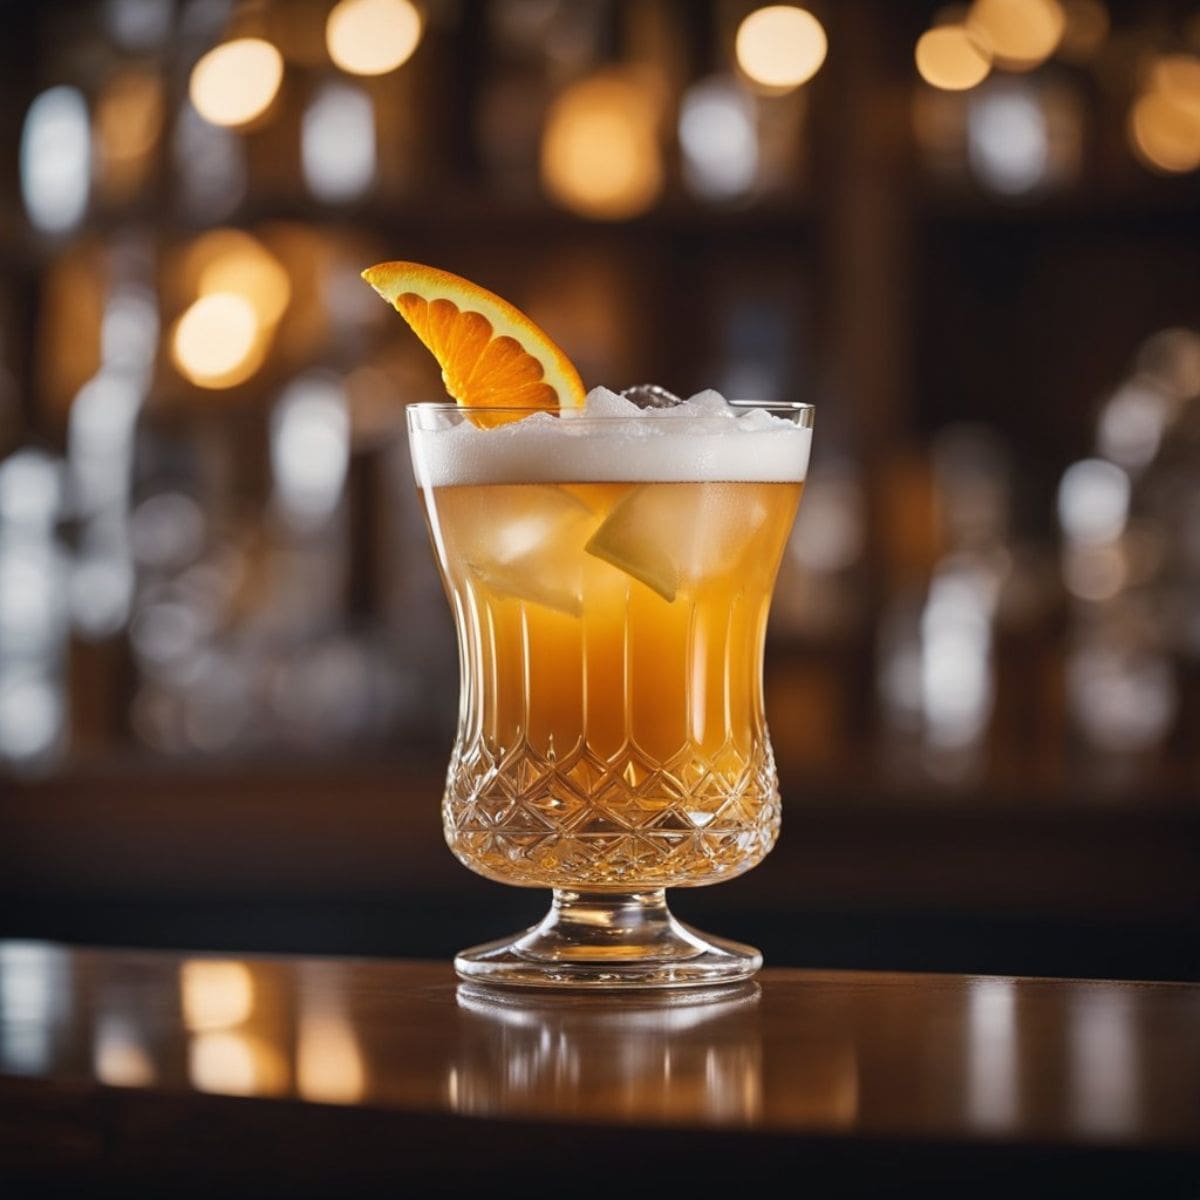 Spiced Rum Sidecar Recipe: A Cozy Cocktail of Sweet, Spice & Citrus